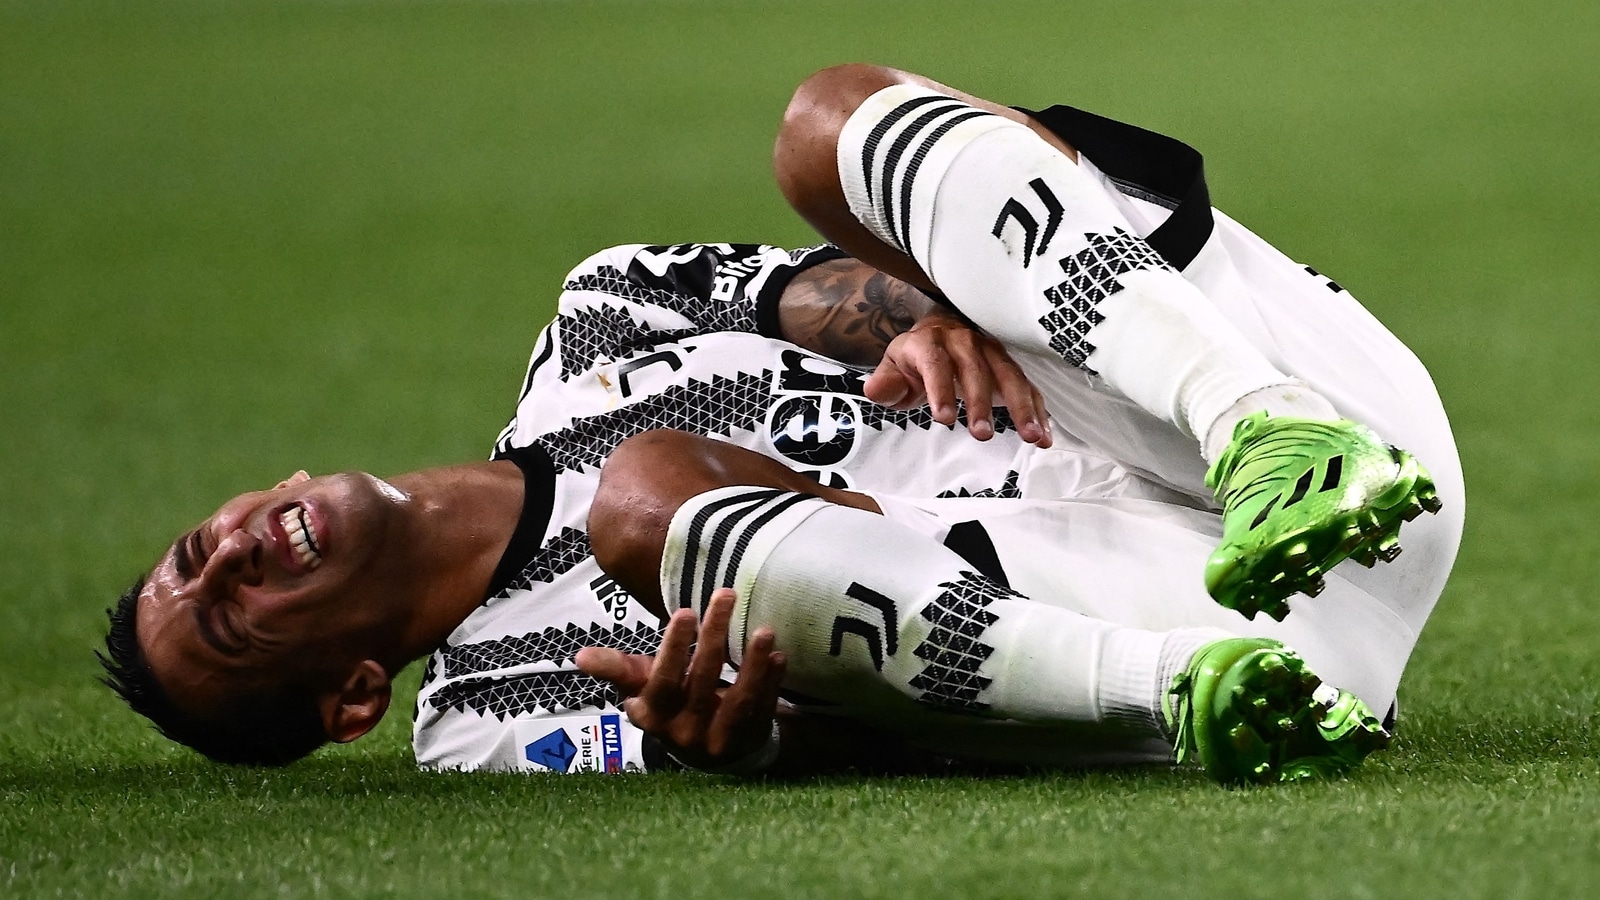 juventus-manager-massimiliano-allegri-unfazed-by-injury-woes